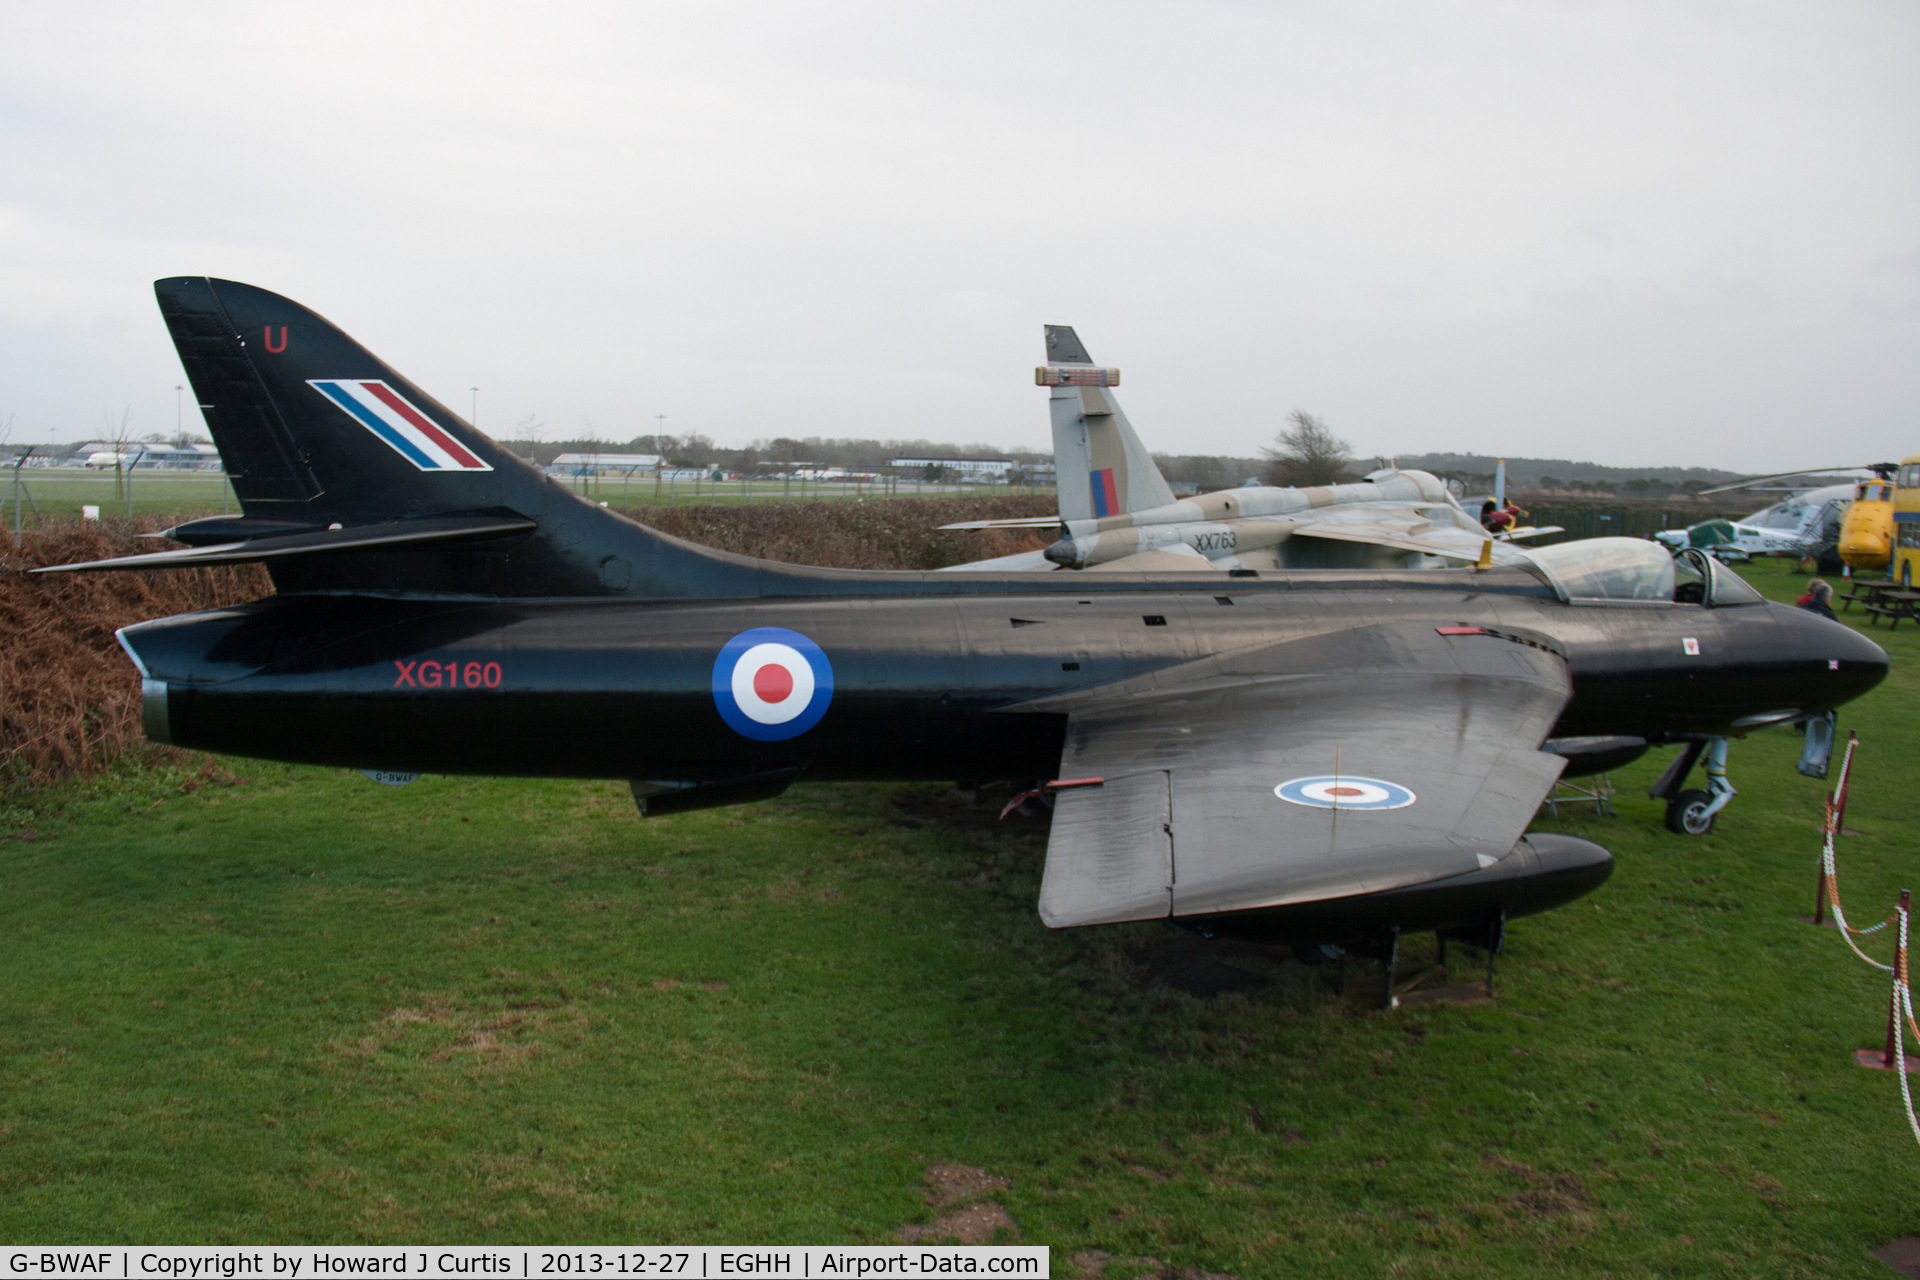 G-BWAF, 1956 Hawker Hunter F.6A C/N S4/U/3393, Painted as XG160/U. On display at the Bournemouth Aviation Museum.